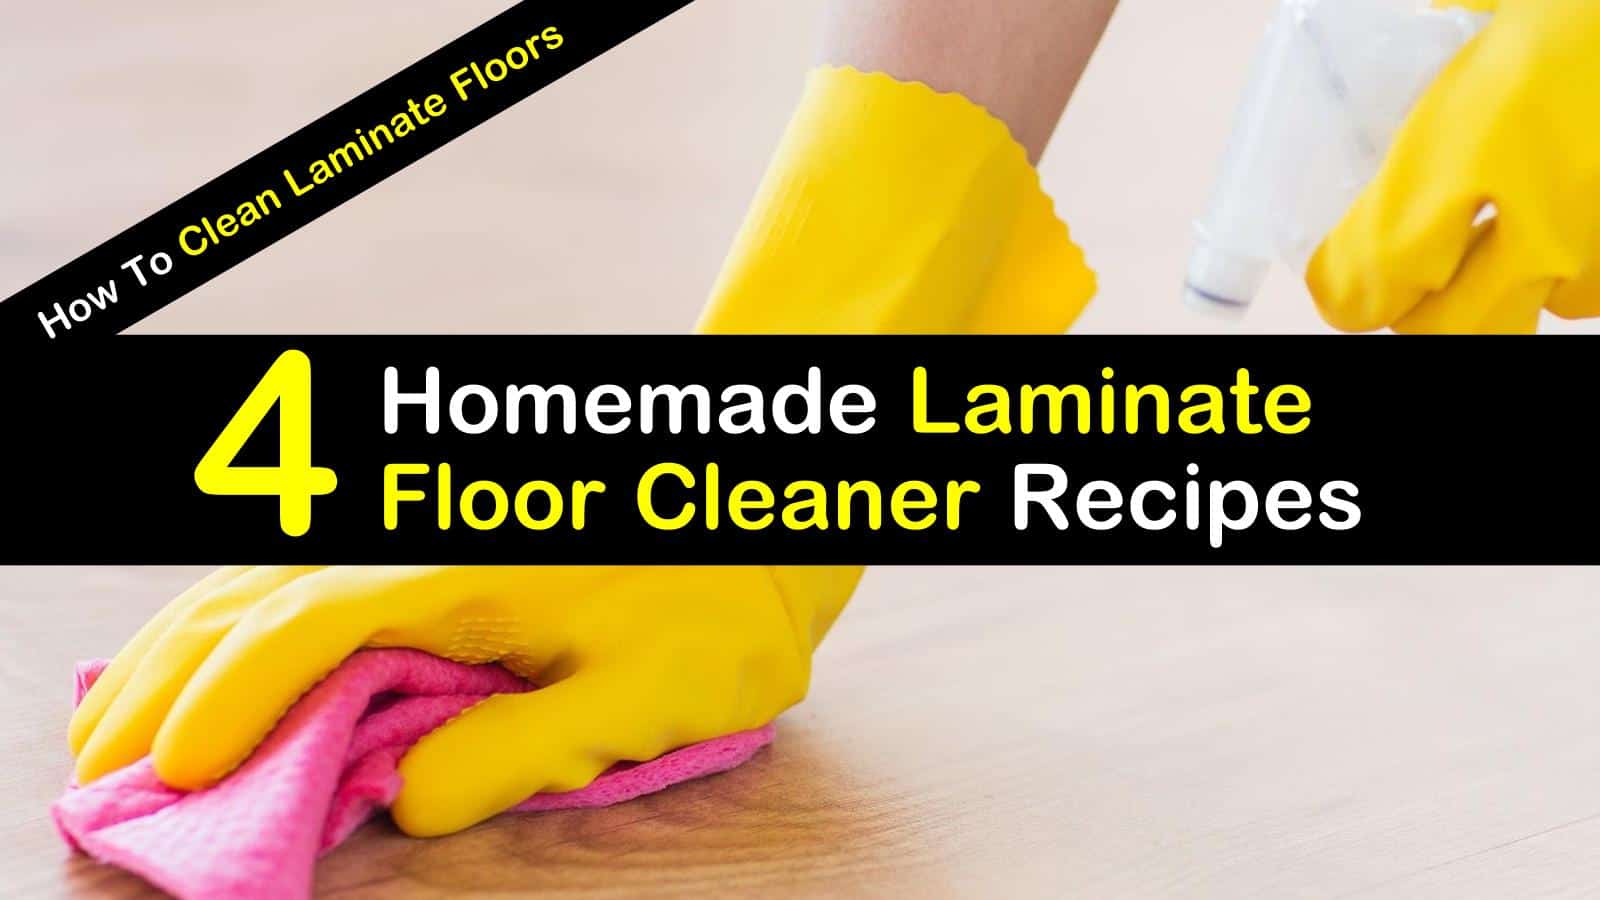 How To Clean Laminate Floors 4, Cleaning Laminate Tile Floors